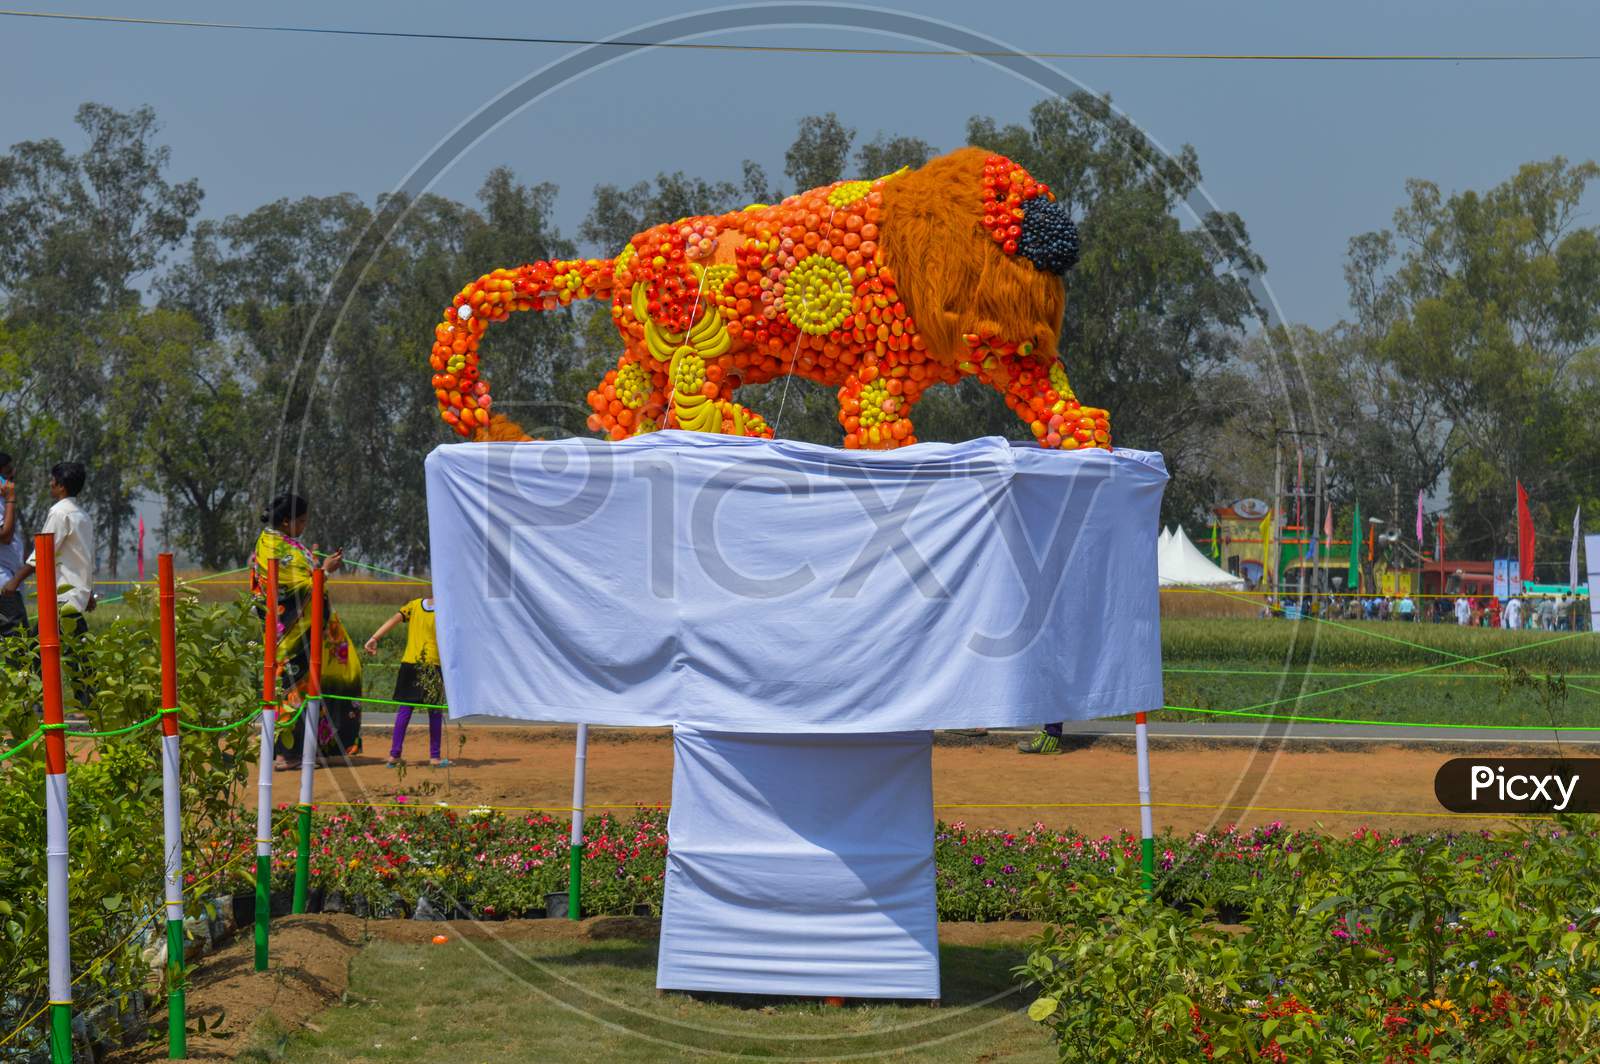 A Statue Of Indian Lion Which Is Made Of Cotton And Fruit Showcase On The Agriculture Festival, Pusa, New Delhi.